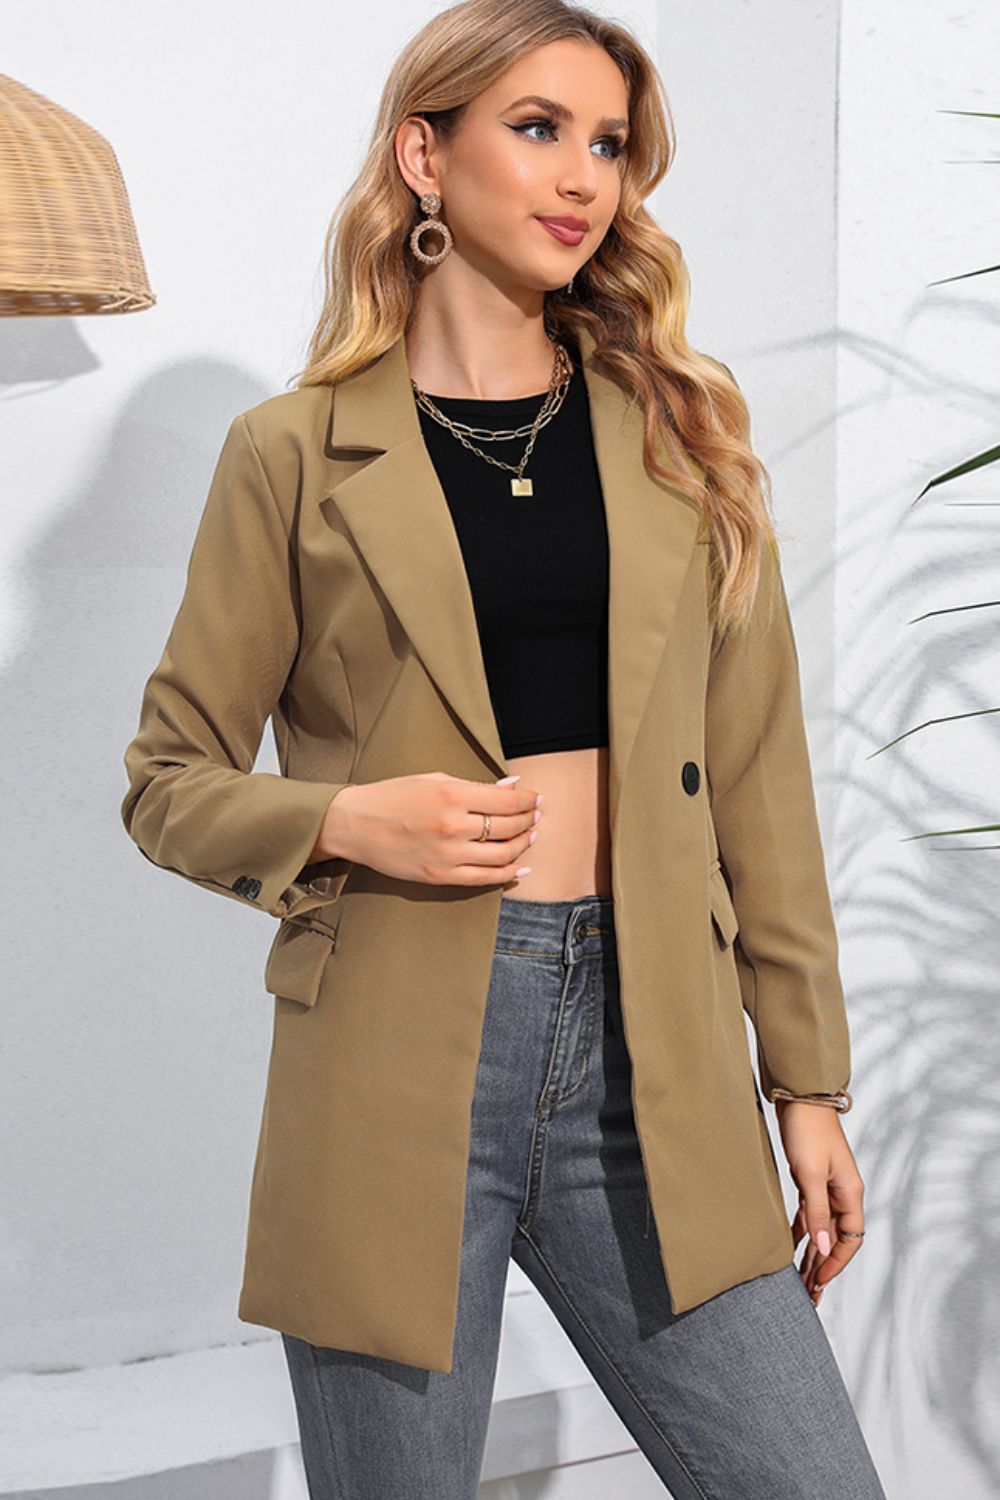 Lapel Neck Long Sleeve Blazer with Pockets - Cheeky Chic Boutique